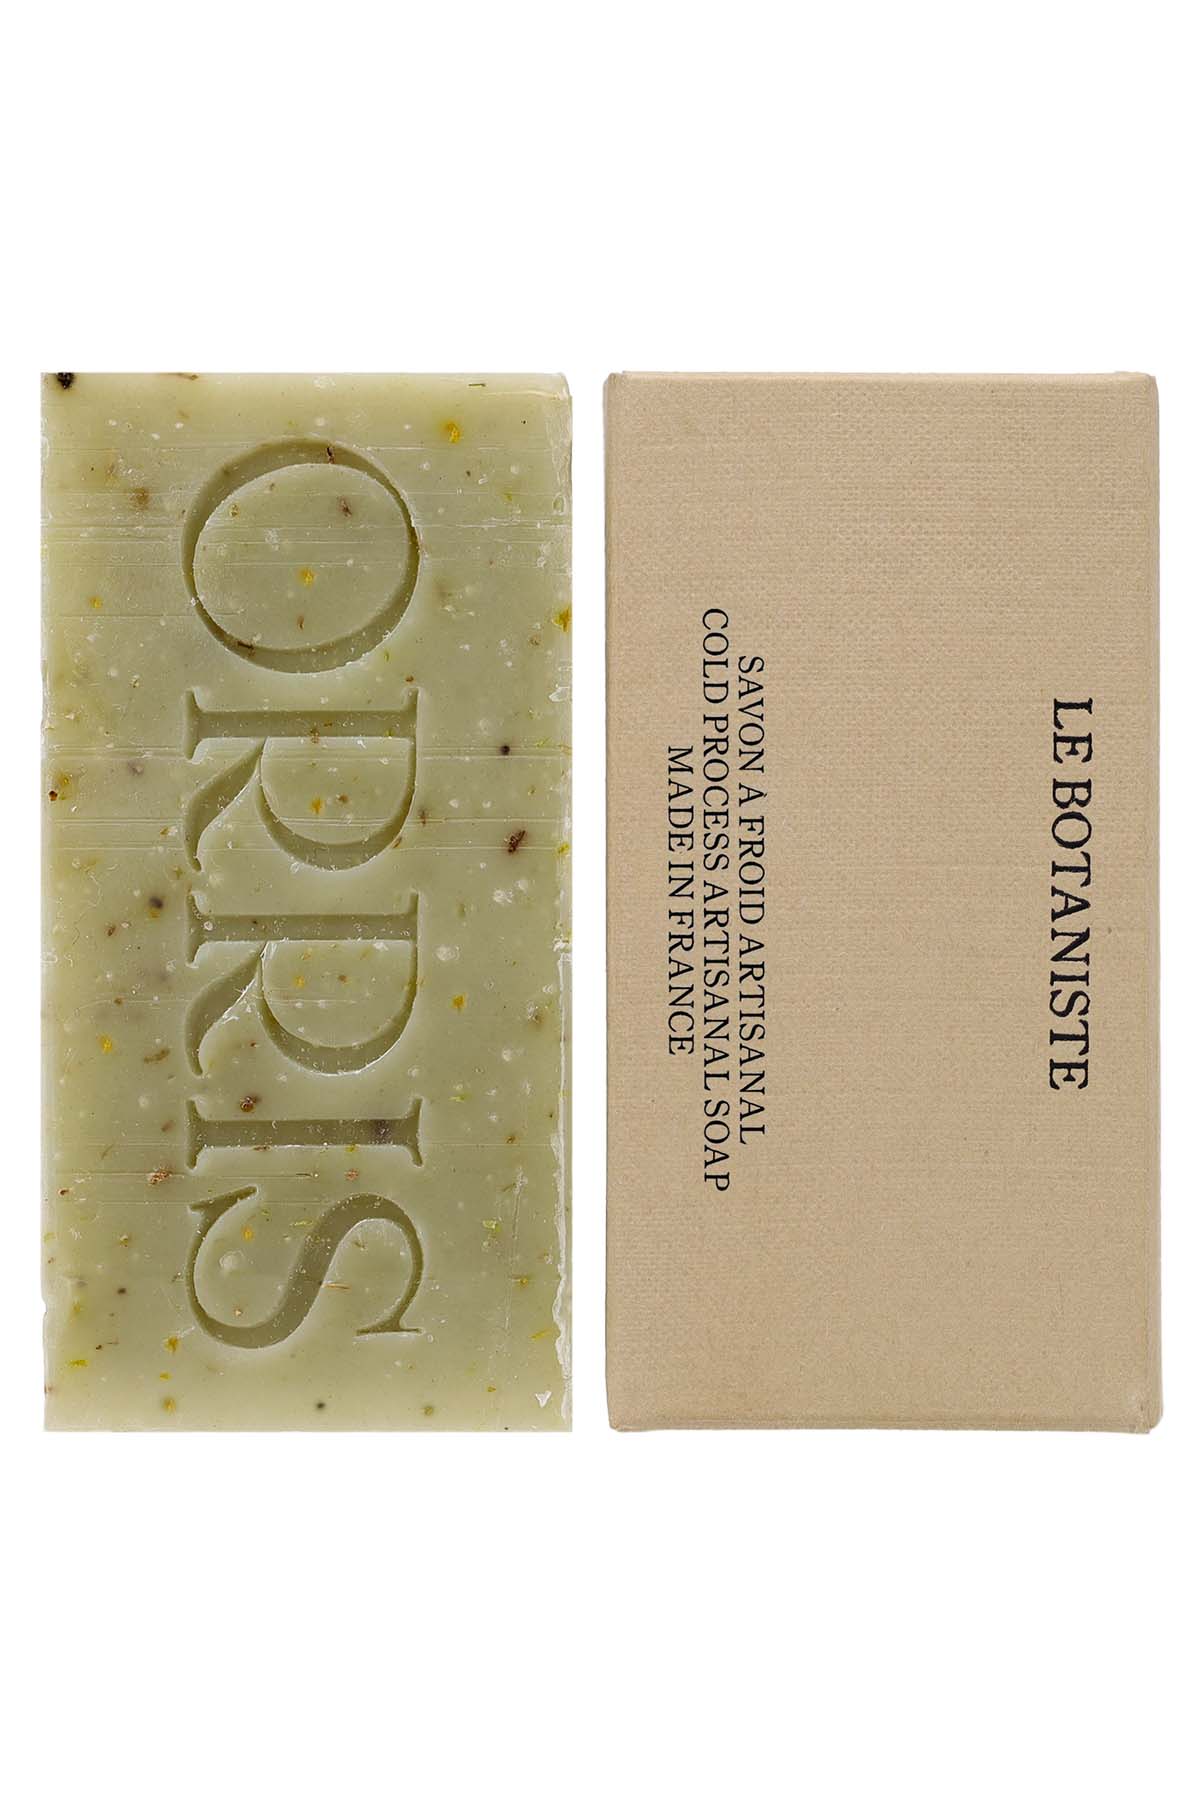 Orris Le Botaniste - Acne Fighting, Soothing + Hydrating Cleansing Bar